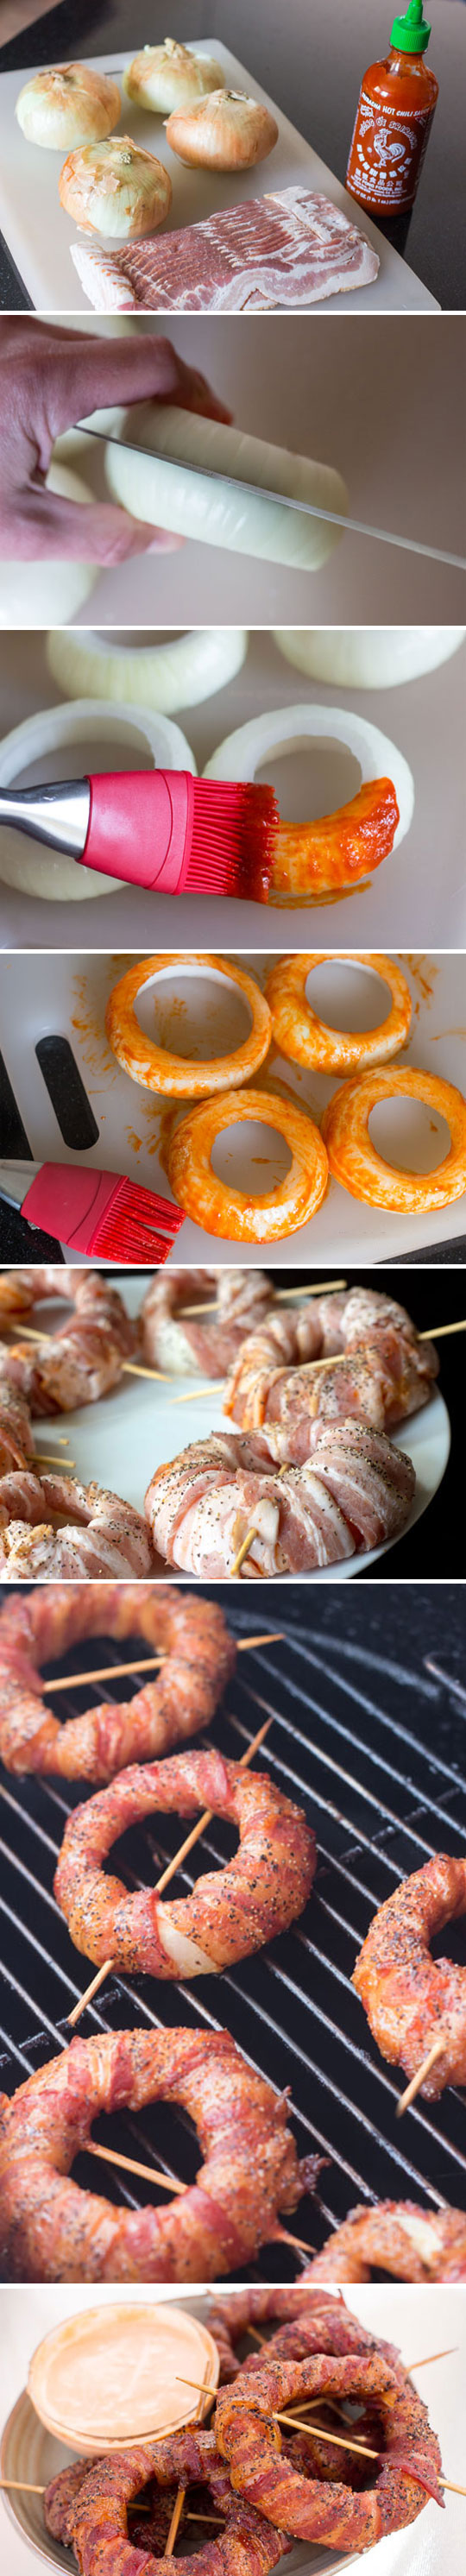 Bacon wrapped onion rings.